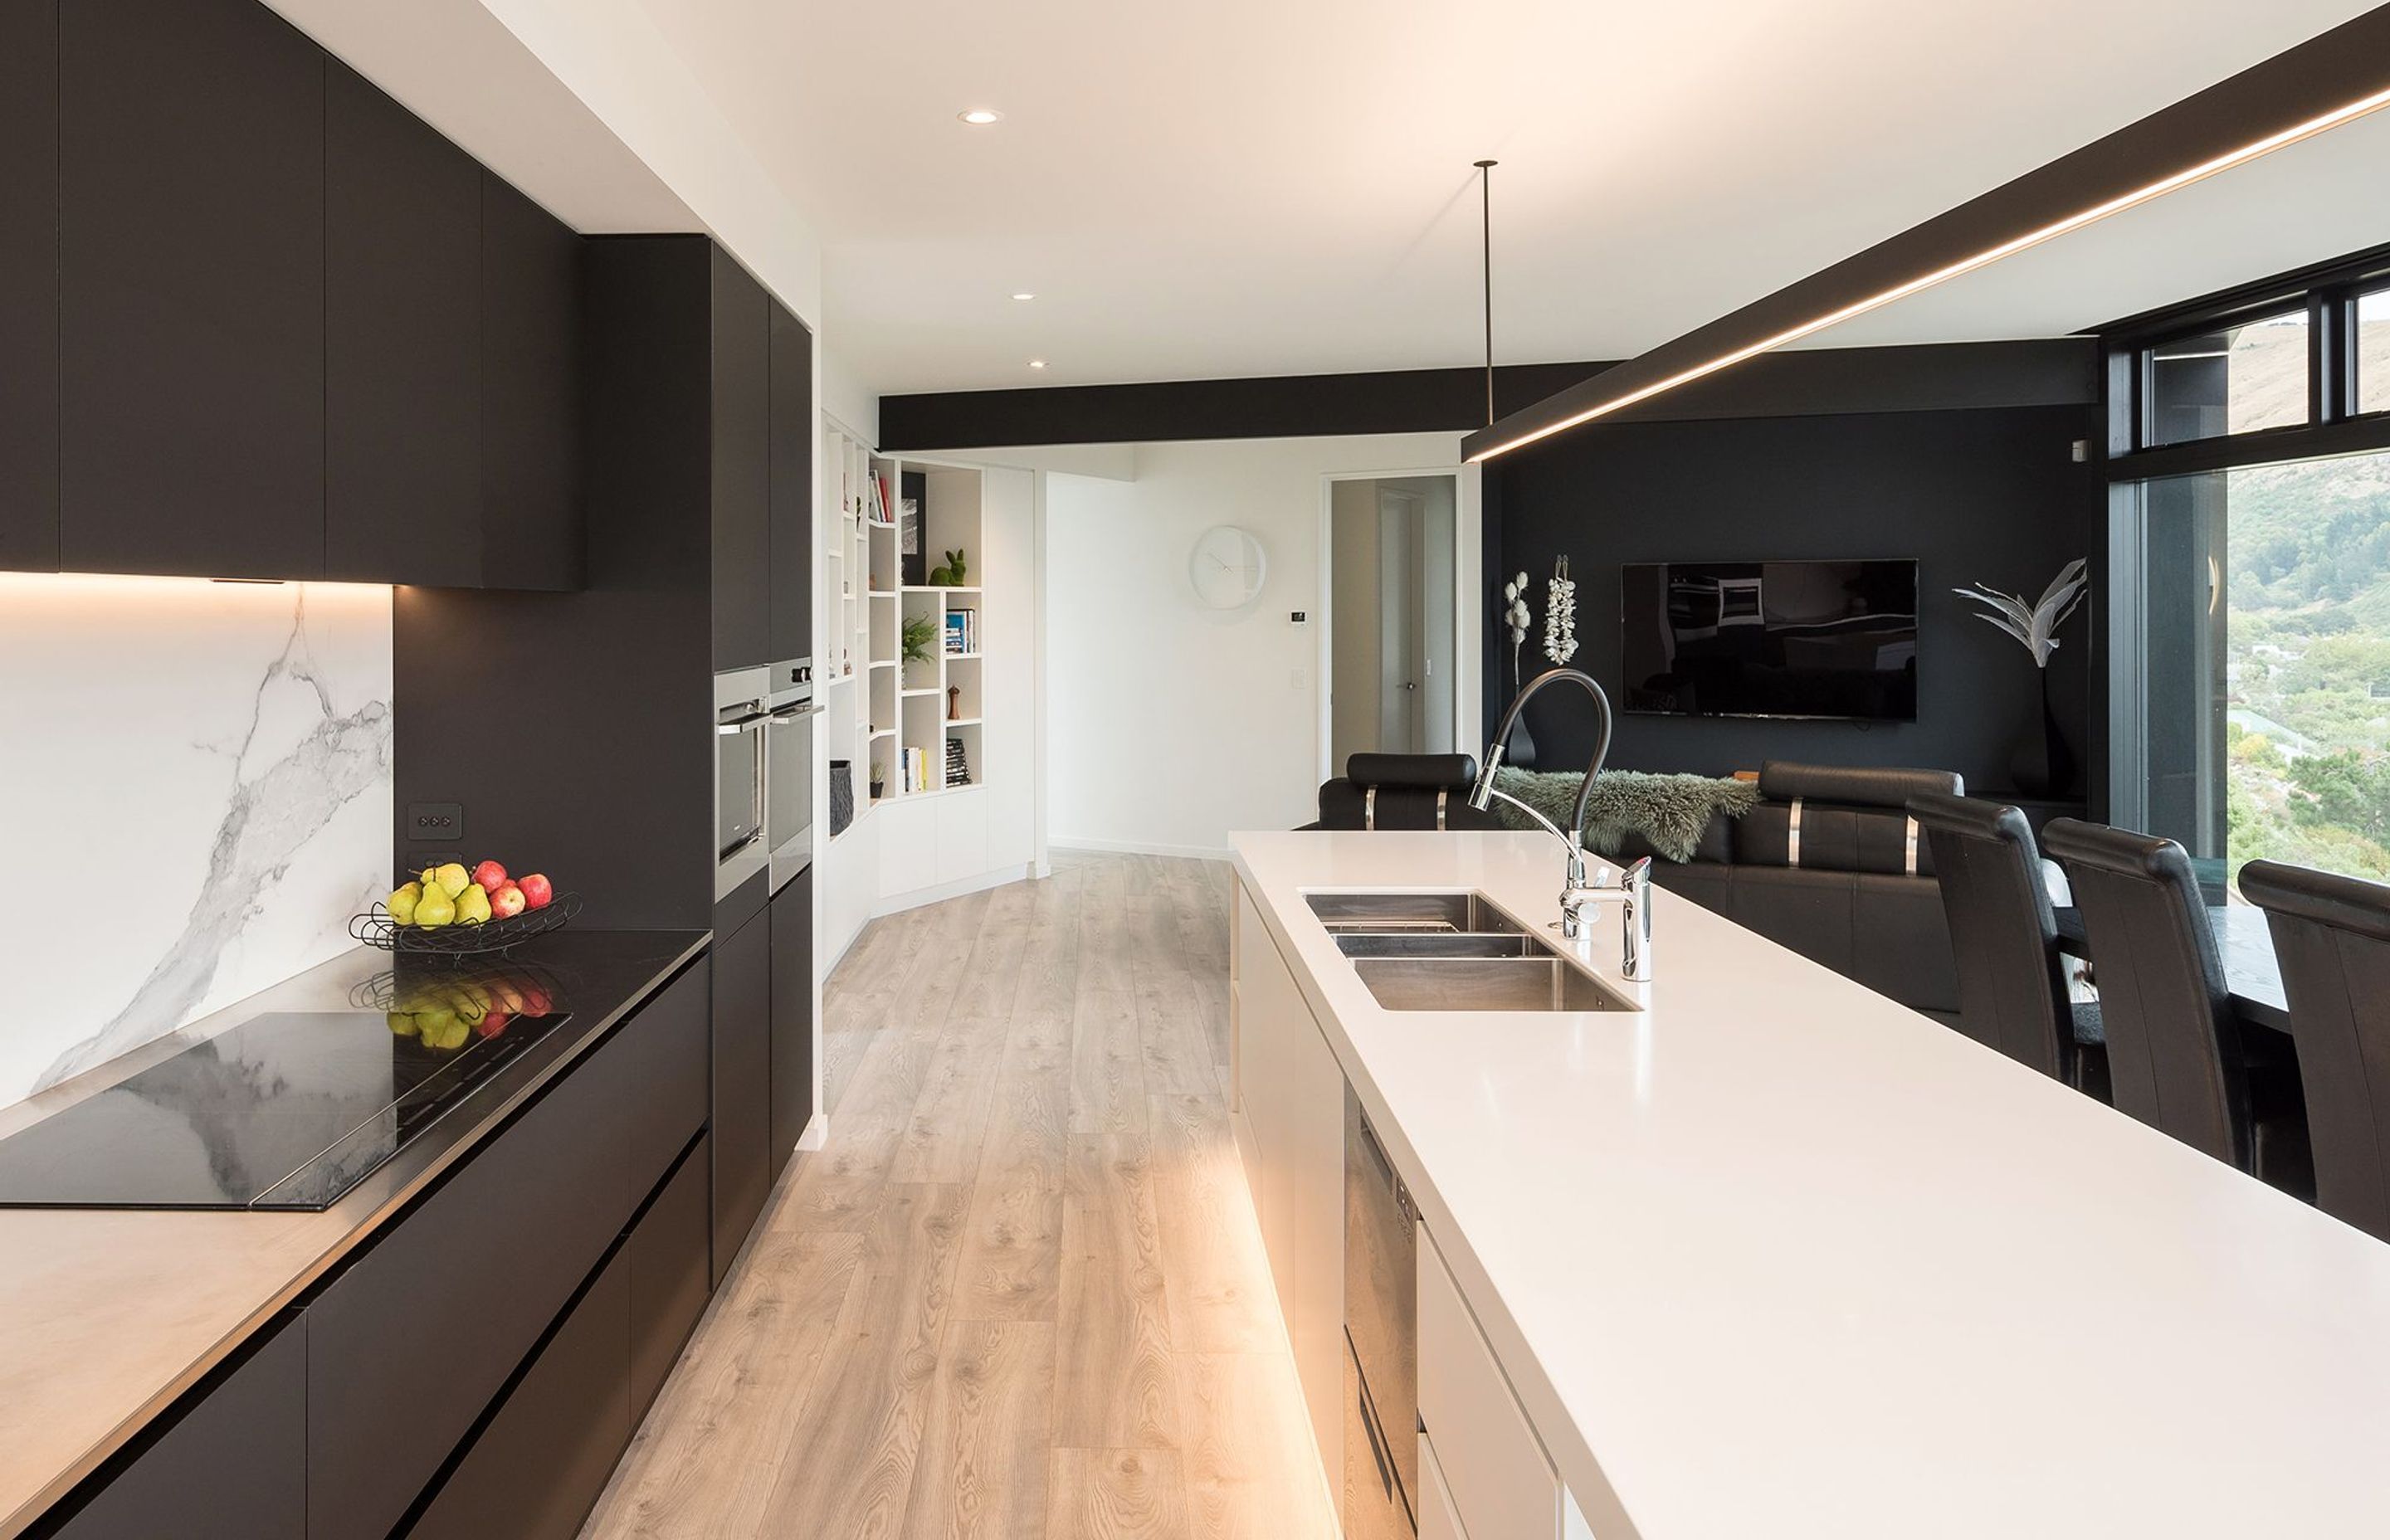 A sleek, minimalist kitchen provides the ideal backdrop to the spectacular view of the Canterbury coastline.